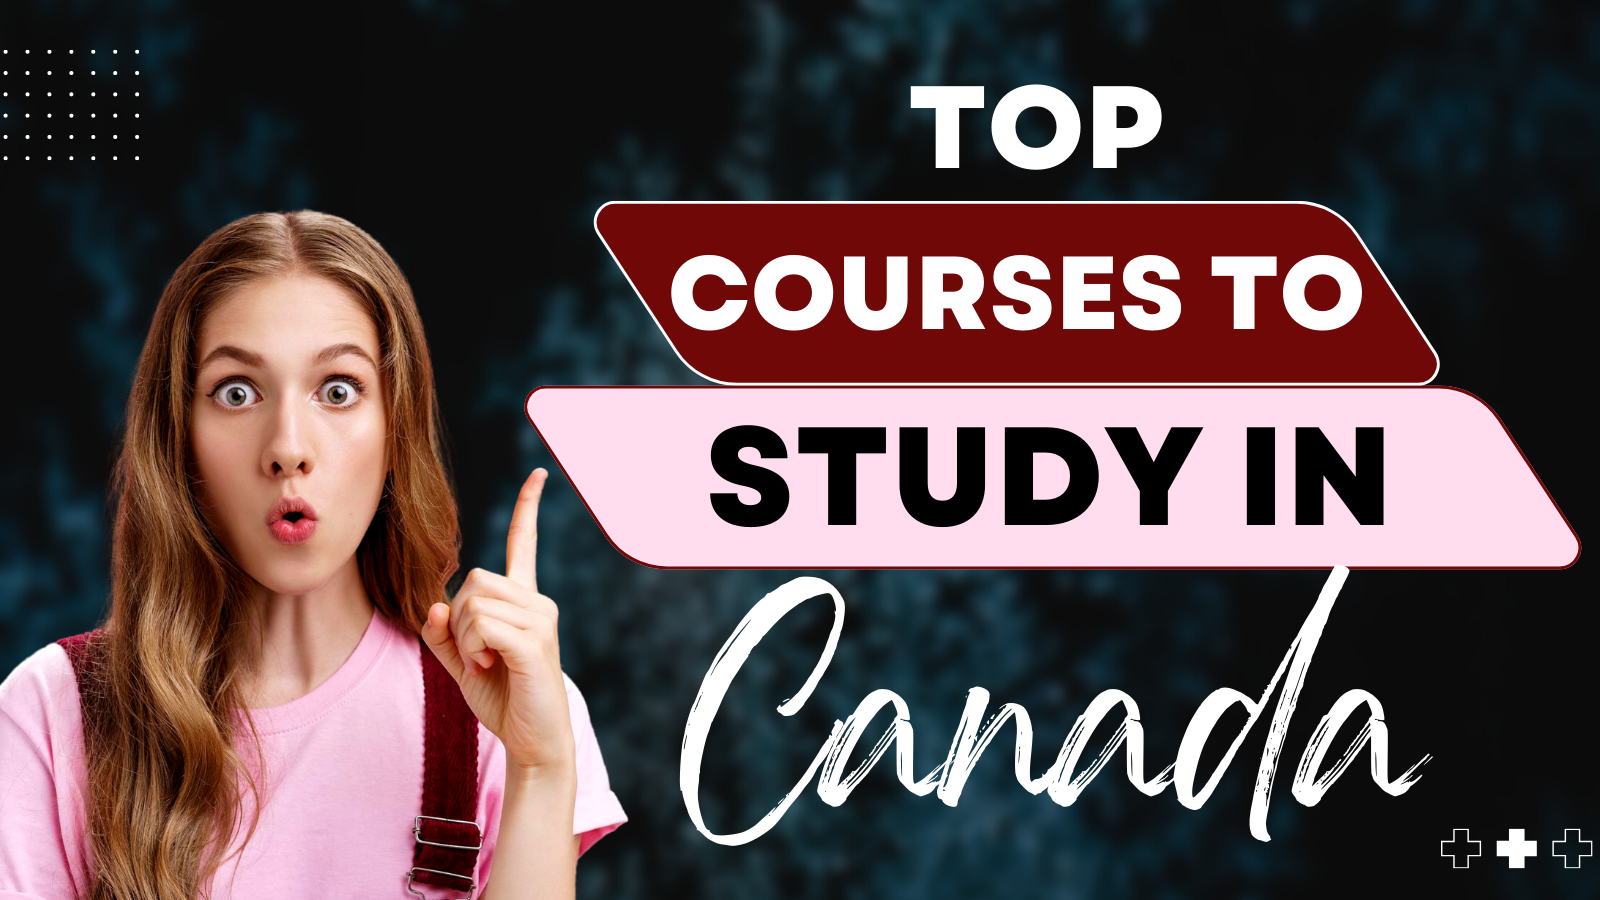 best colleges in canada for it courses,best courses after ba in canada,best courses in canada,best courses in canada after 12th,best courses in canada after 12th commerce,best courses in canada after bcom,canada best courses to study,